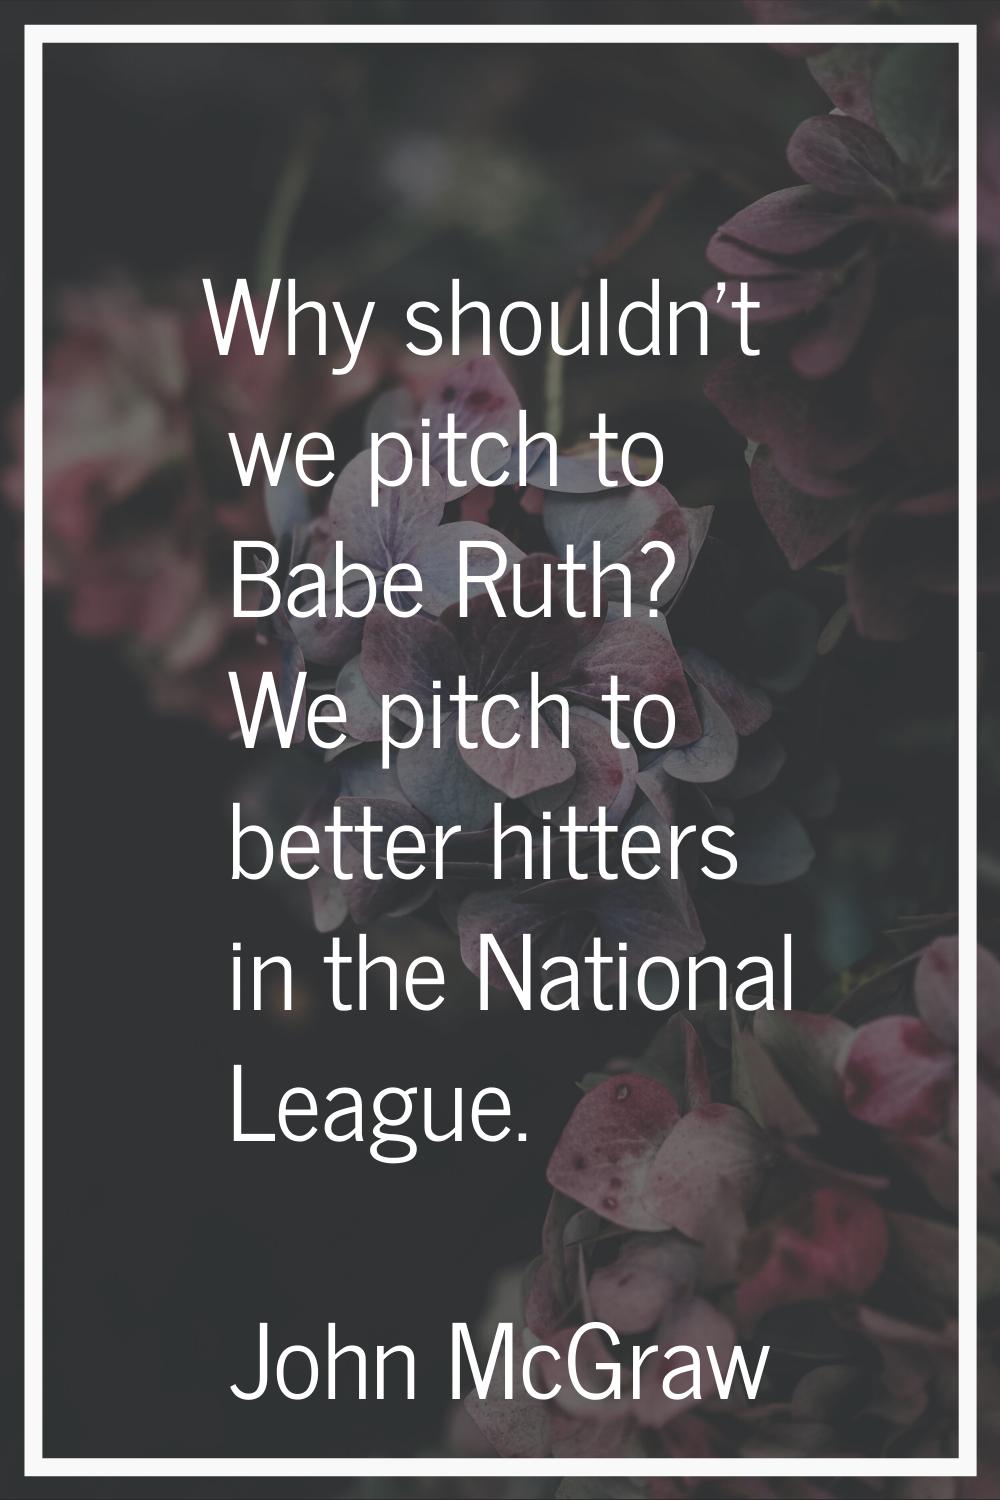 Why shouldn't we pitch to Babe Ruth? We pitch to better hitters in the National League.